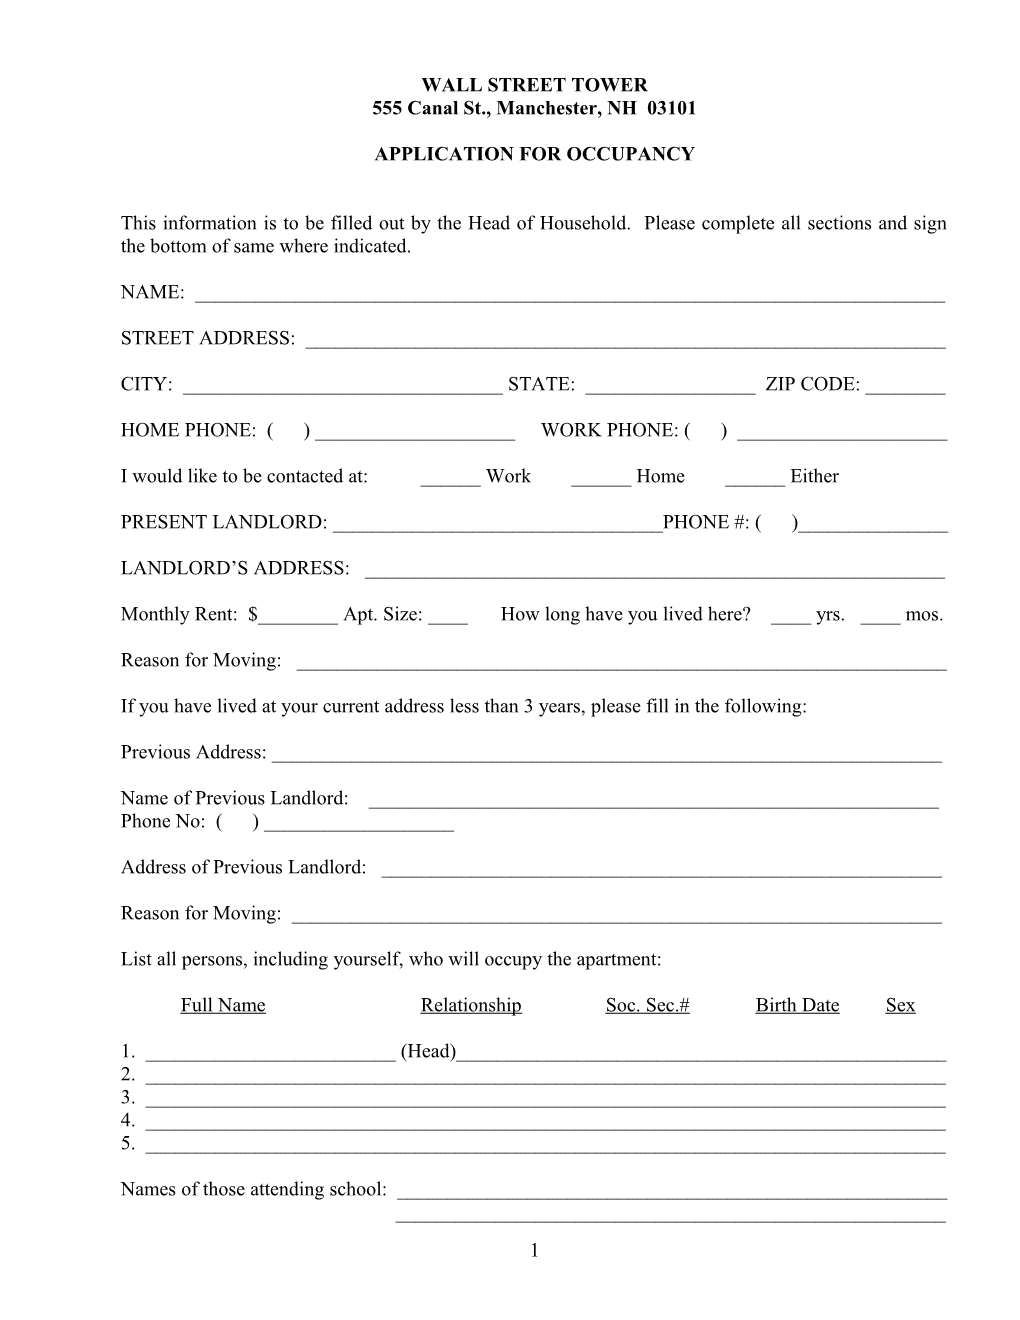 Application for Occupancy s2